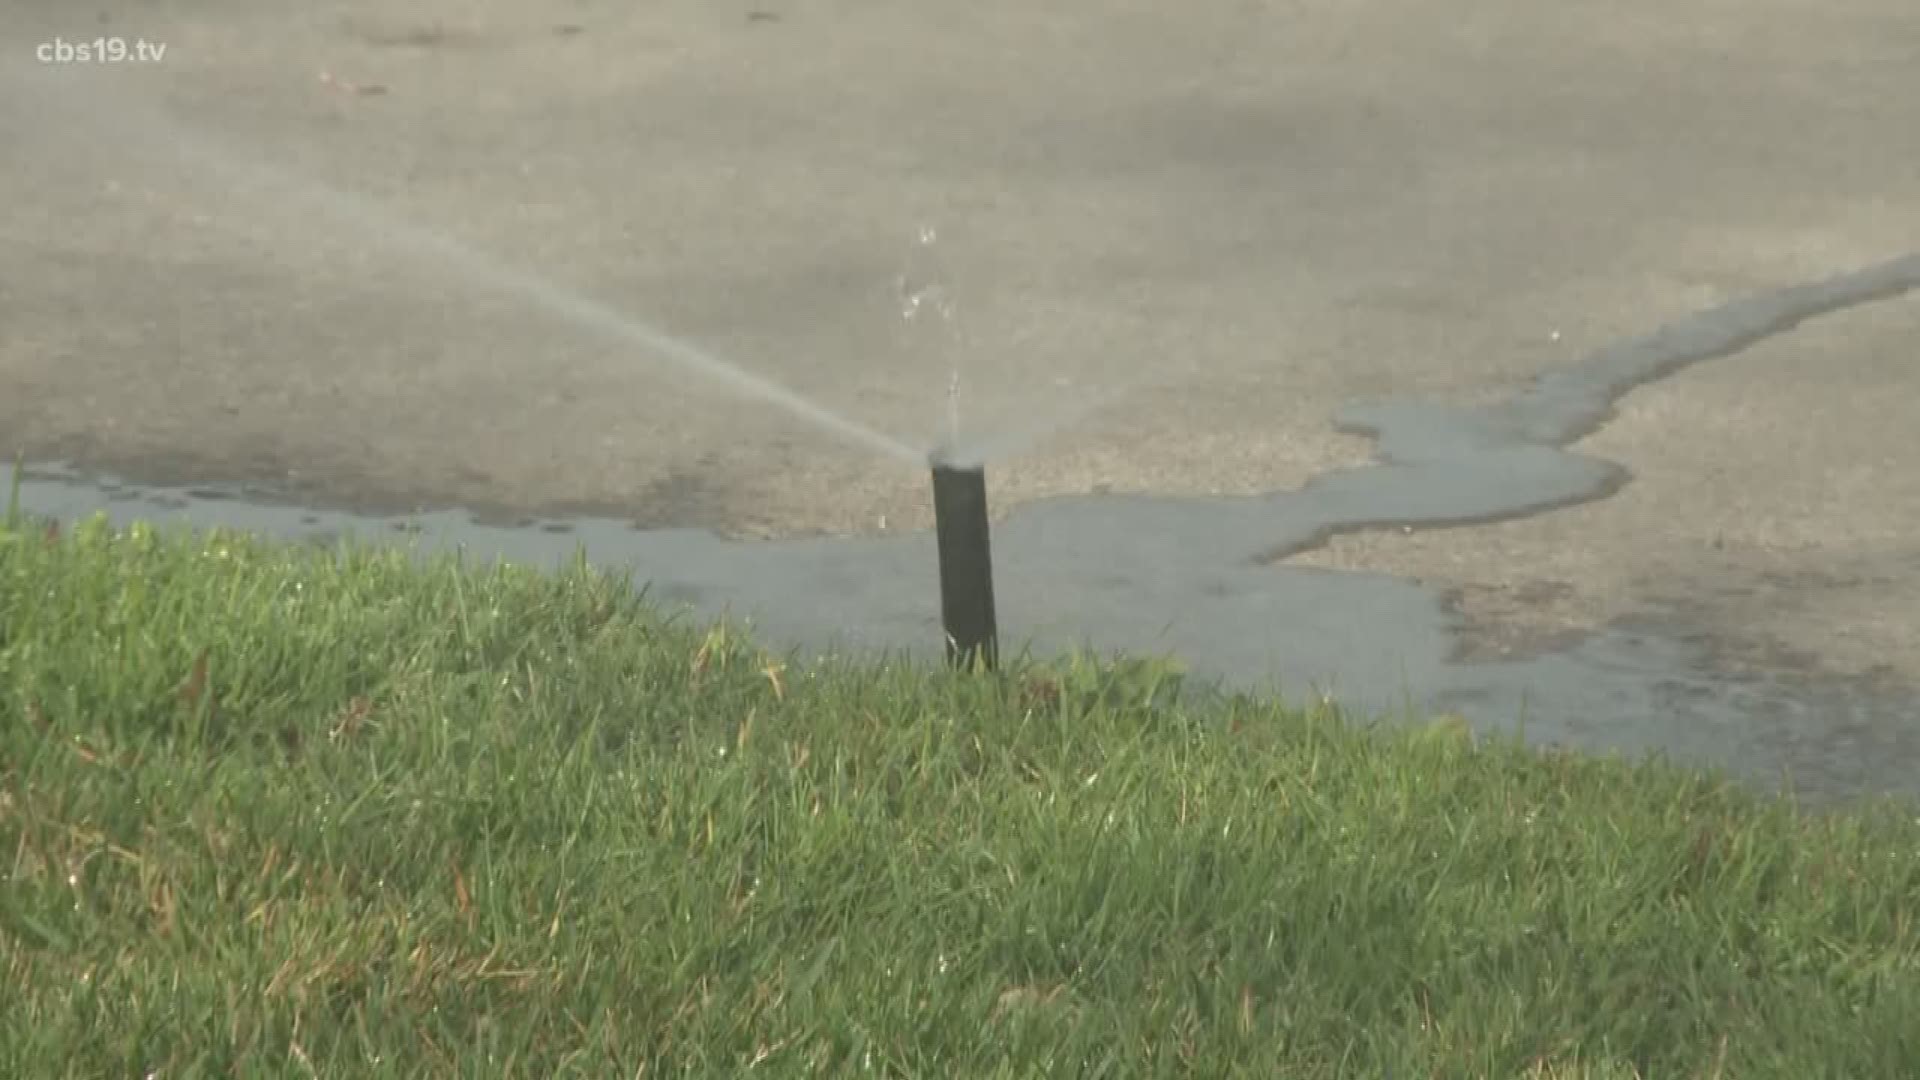 The local Benjamin Franklin plumbing team in Tyler has released tips to help conserve water this summer. Master Plumber John Crymes shares some of the small changes we can make at home to start conserving now.